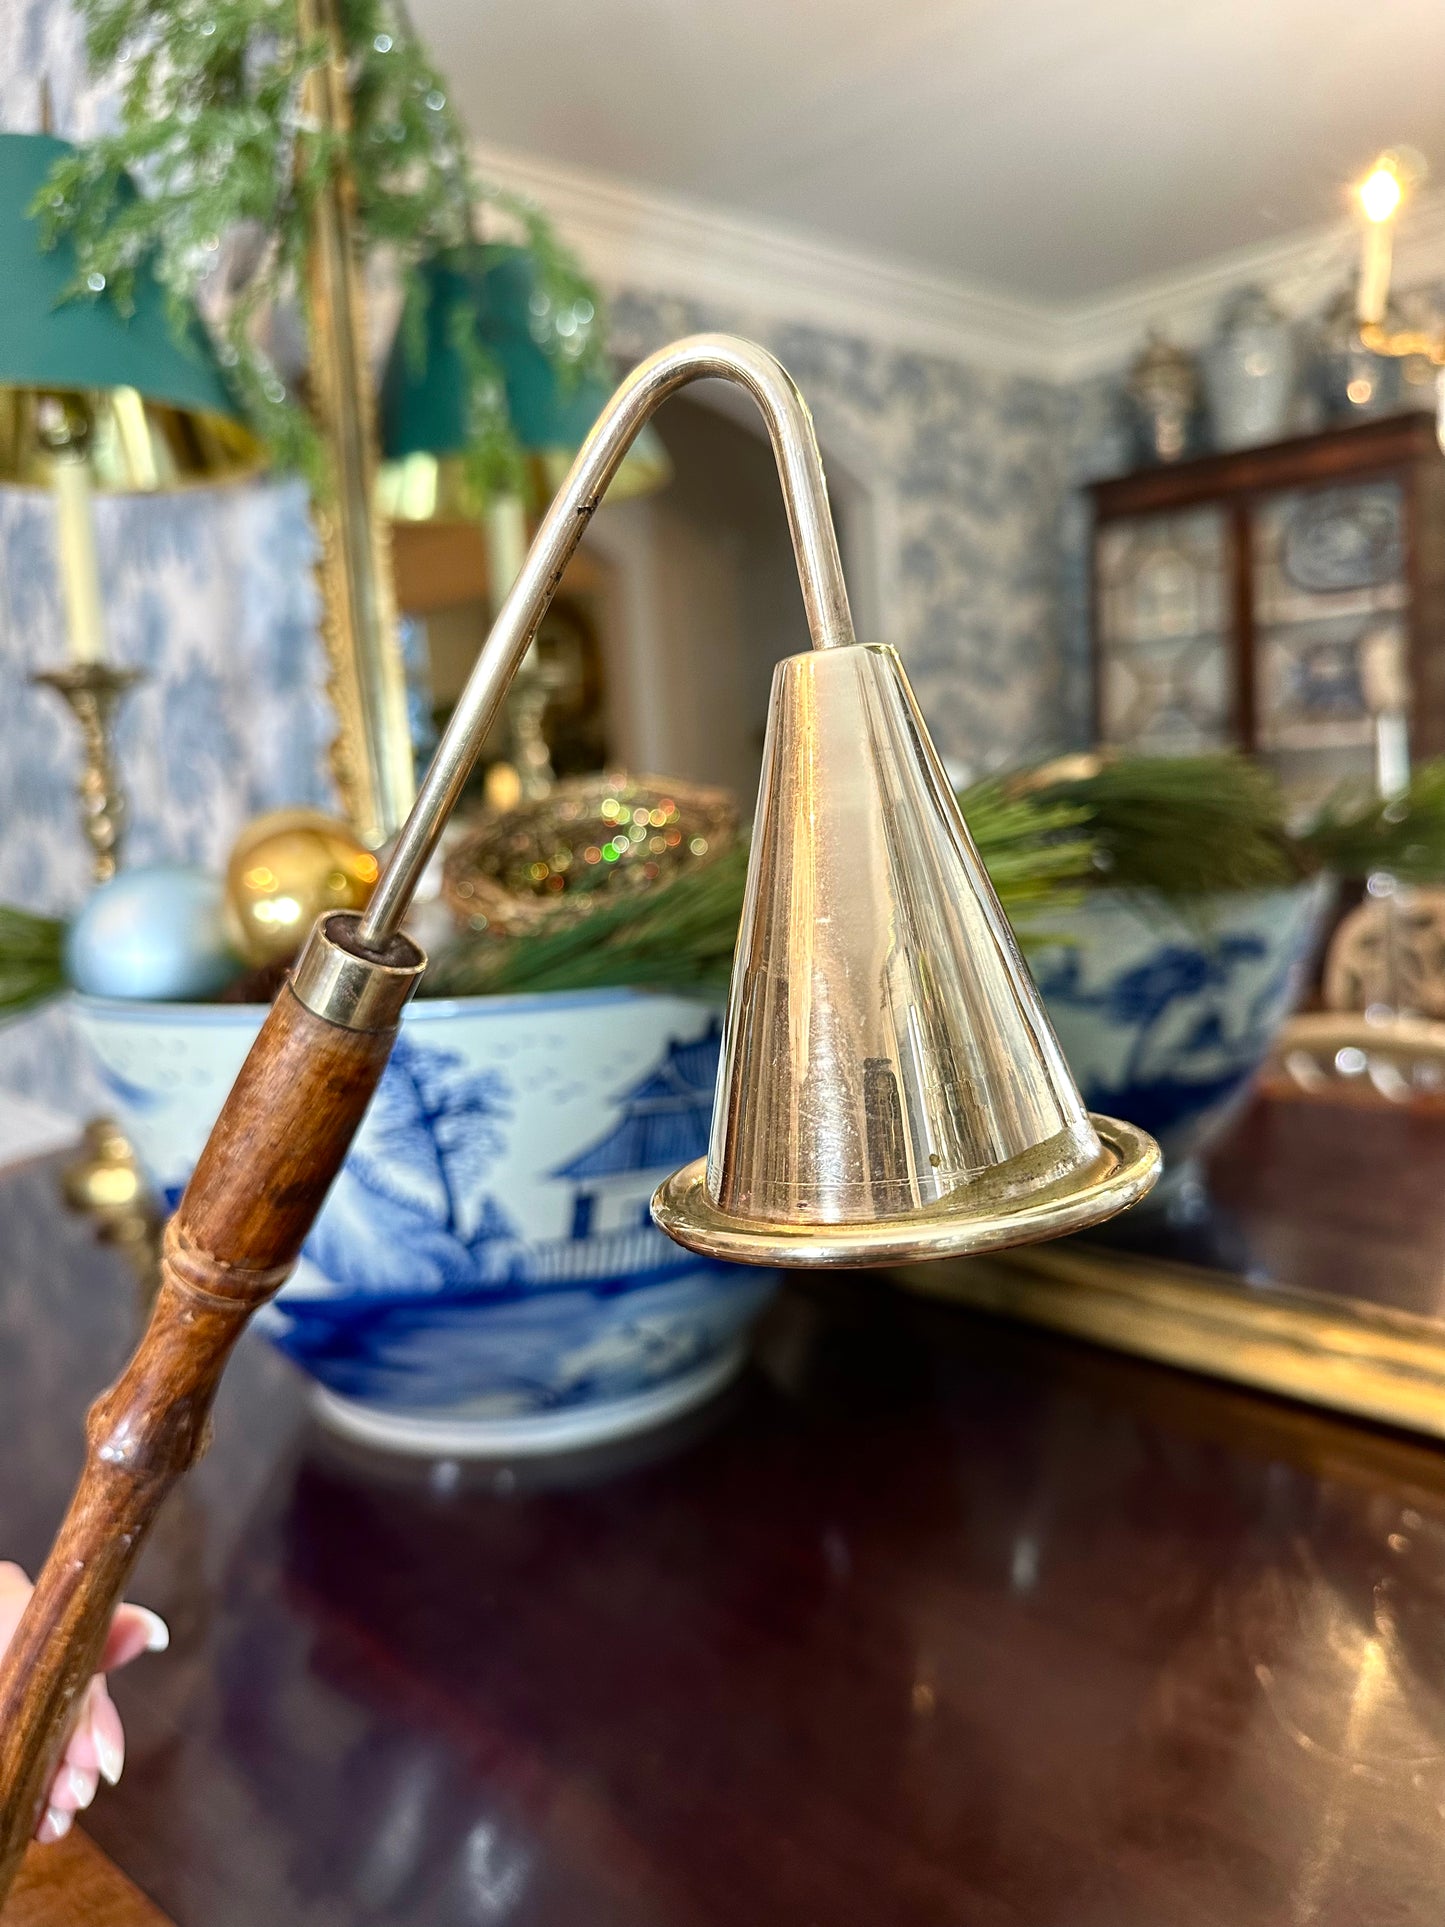 XL Vintage Brass & Wood Candle Snuffer, Measures 16” long x 5” high.